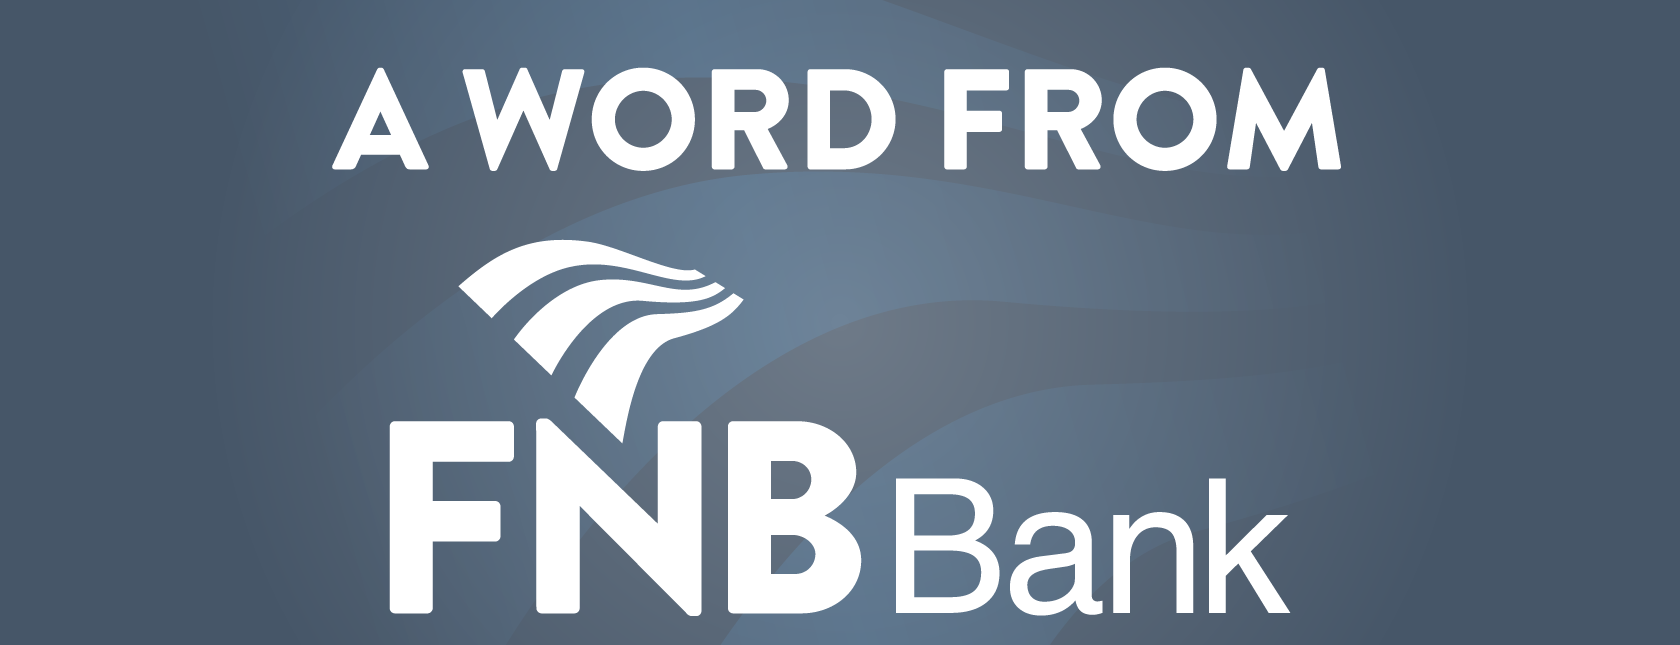 A Word From FNB Bank